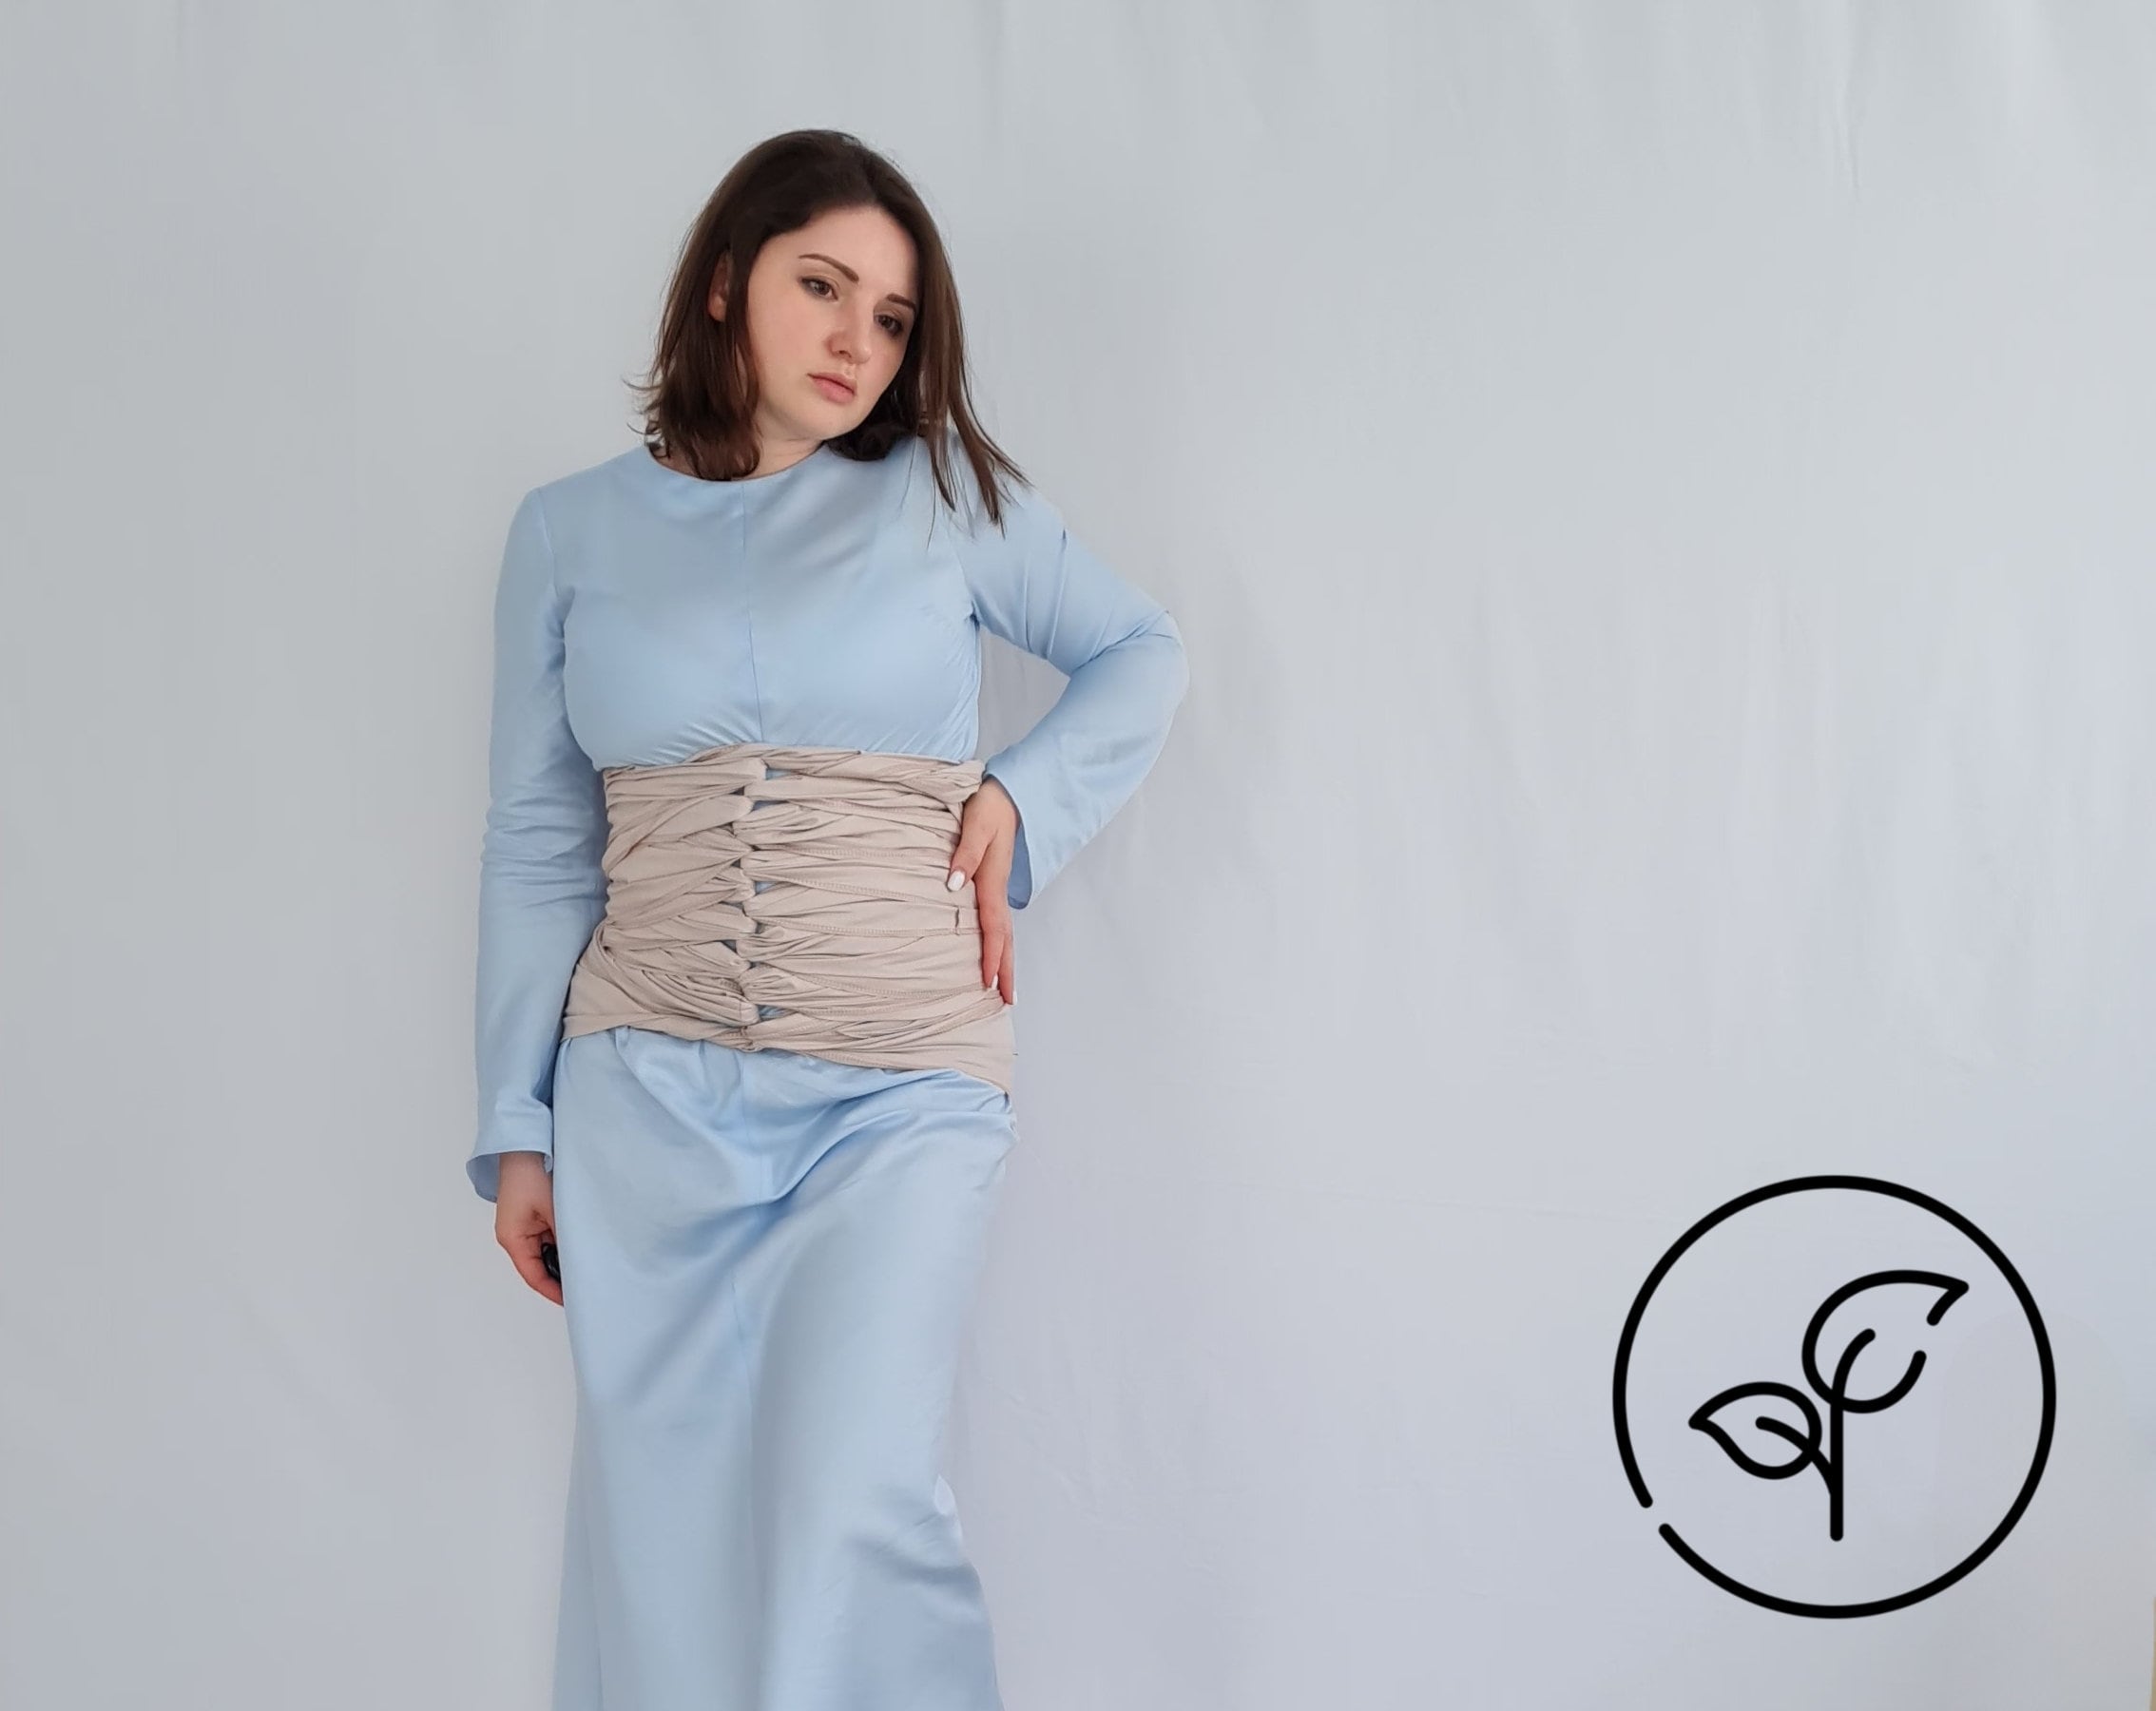 Benkung Belly Bind Bio Cotton, New Mom Self Care, Postnatal Supports the  Womb, Organic Maternity Belt for Support, Postpartum Belly Wrap -   Canada